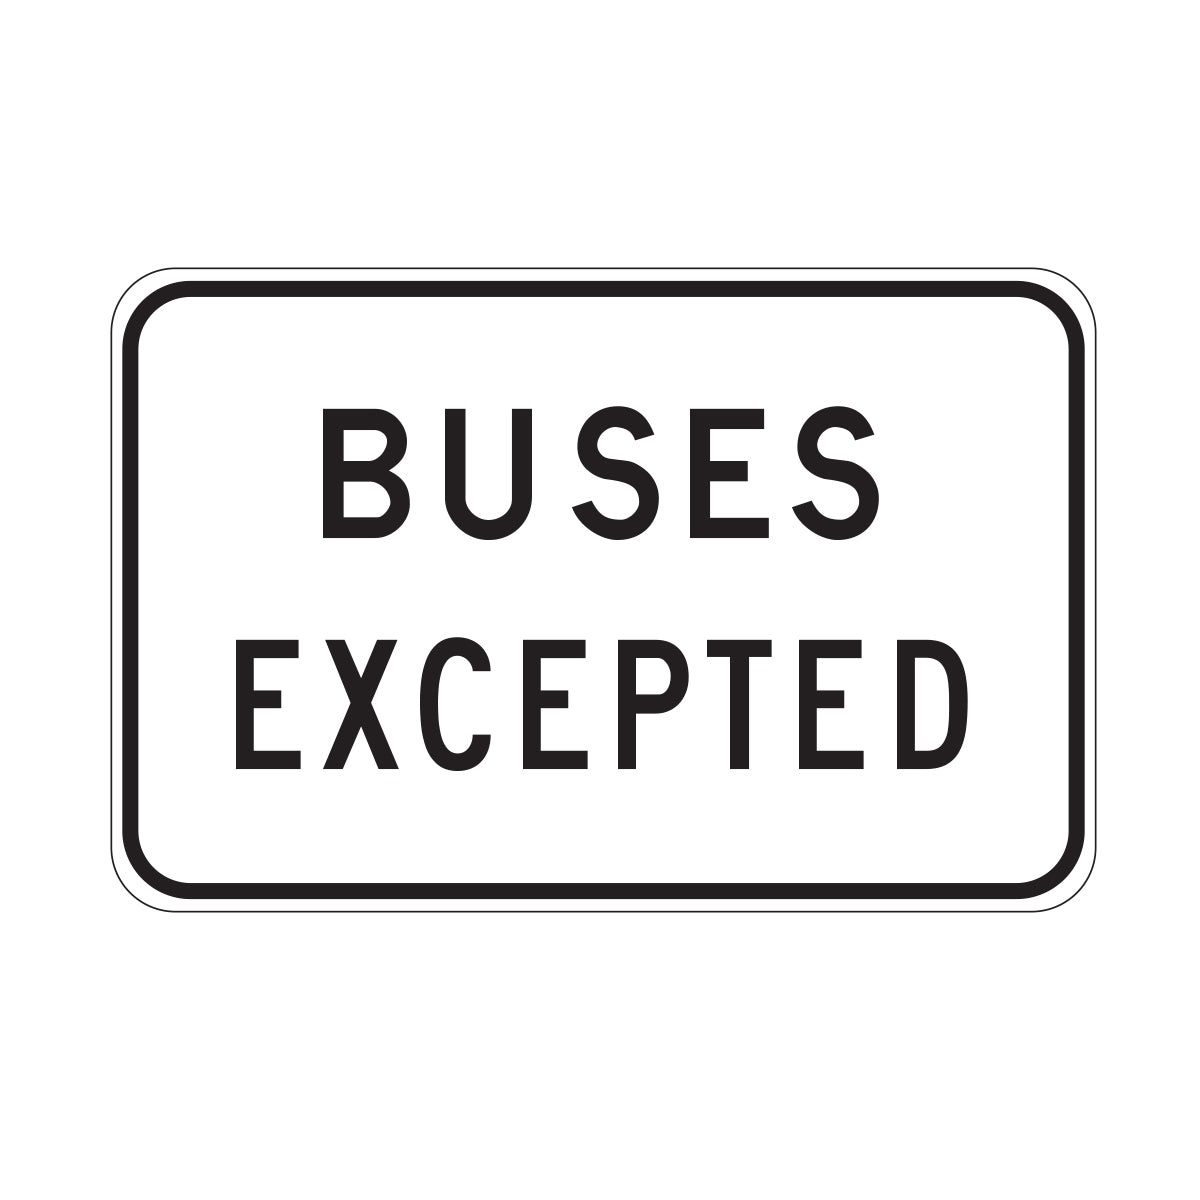 Buses Excepted Sign